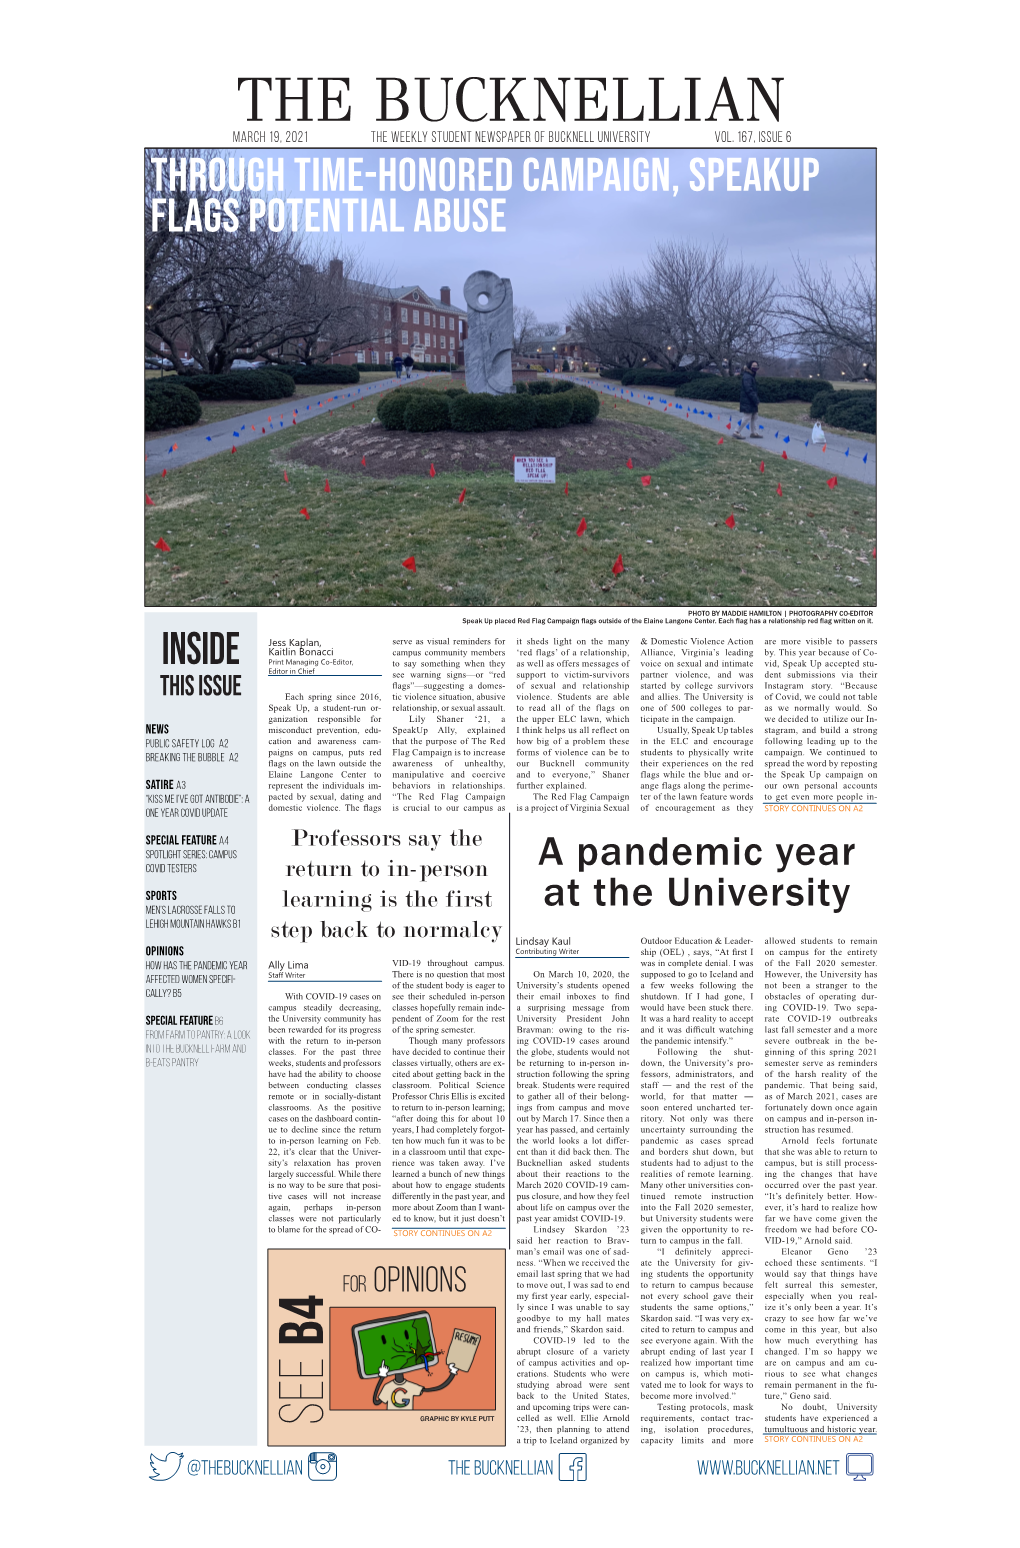 The Bucknellian March 19, 2021 the Weekly Student Newspaper of Bucknell University Vol